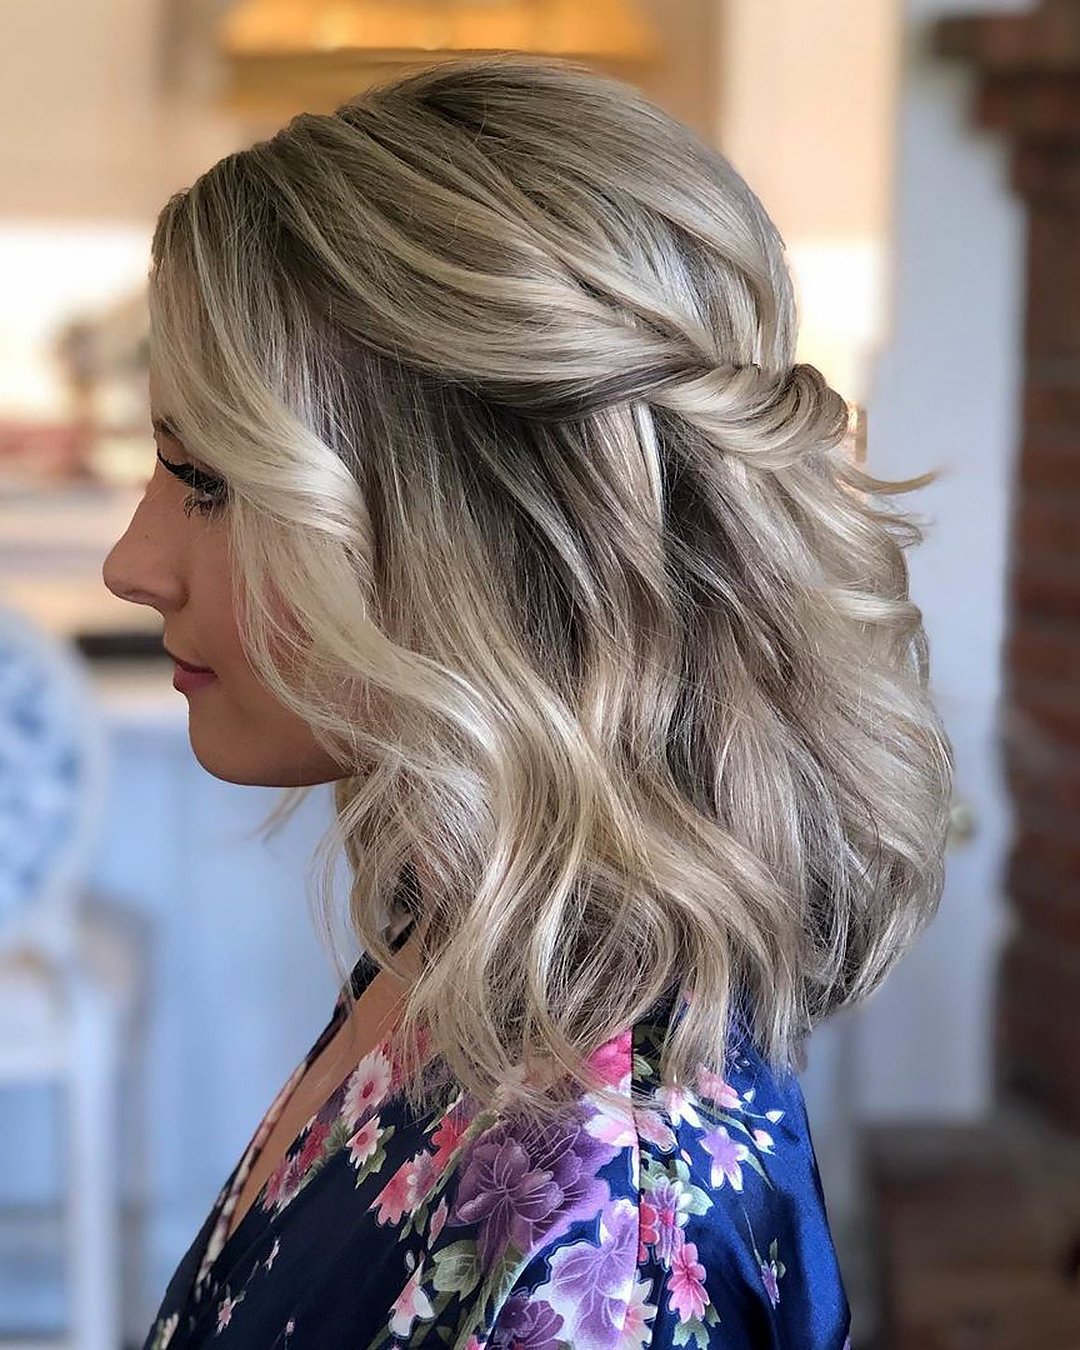 10 Chic Wedding Hairstyles For Brides With Short Hair